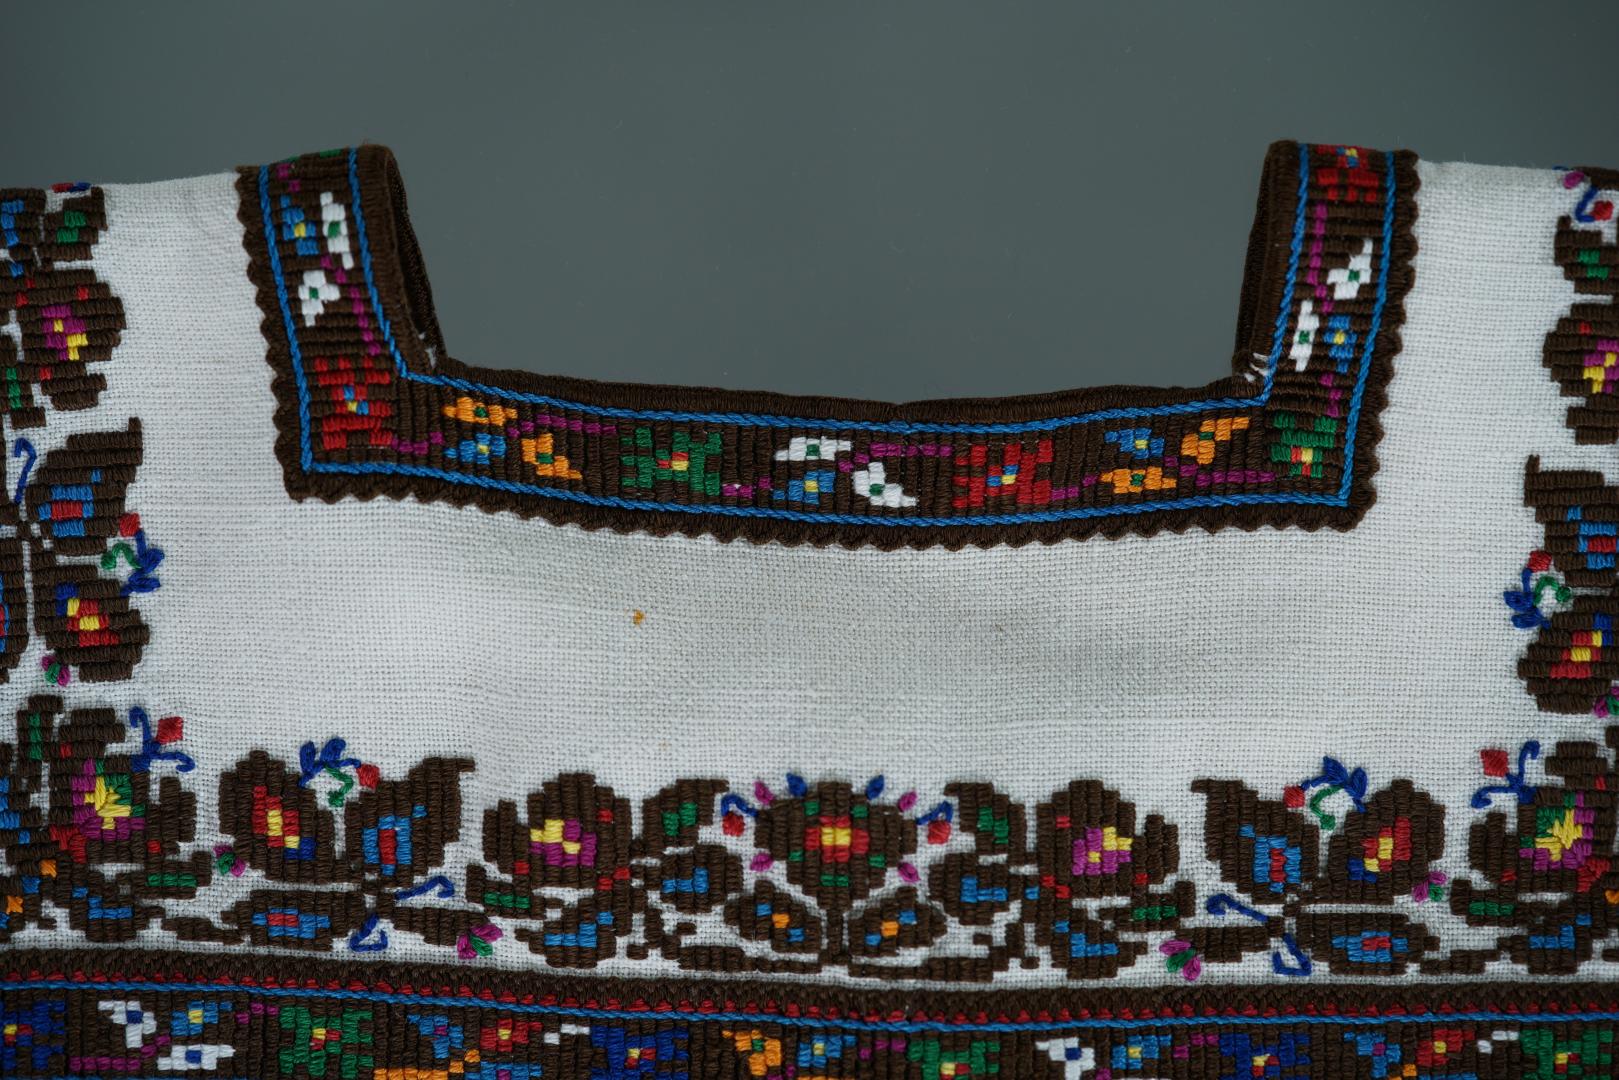 Women's embroidered shirt